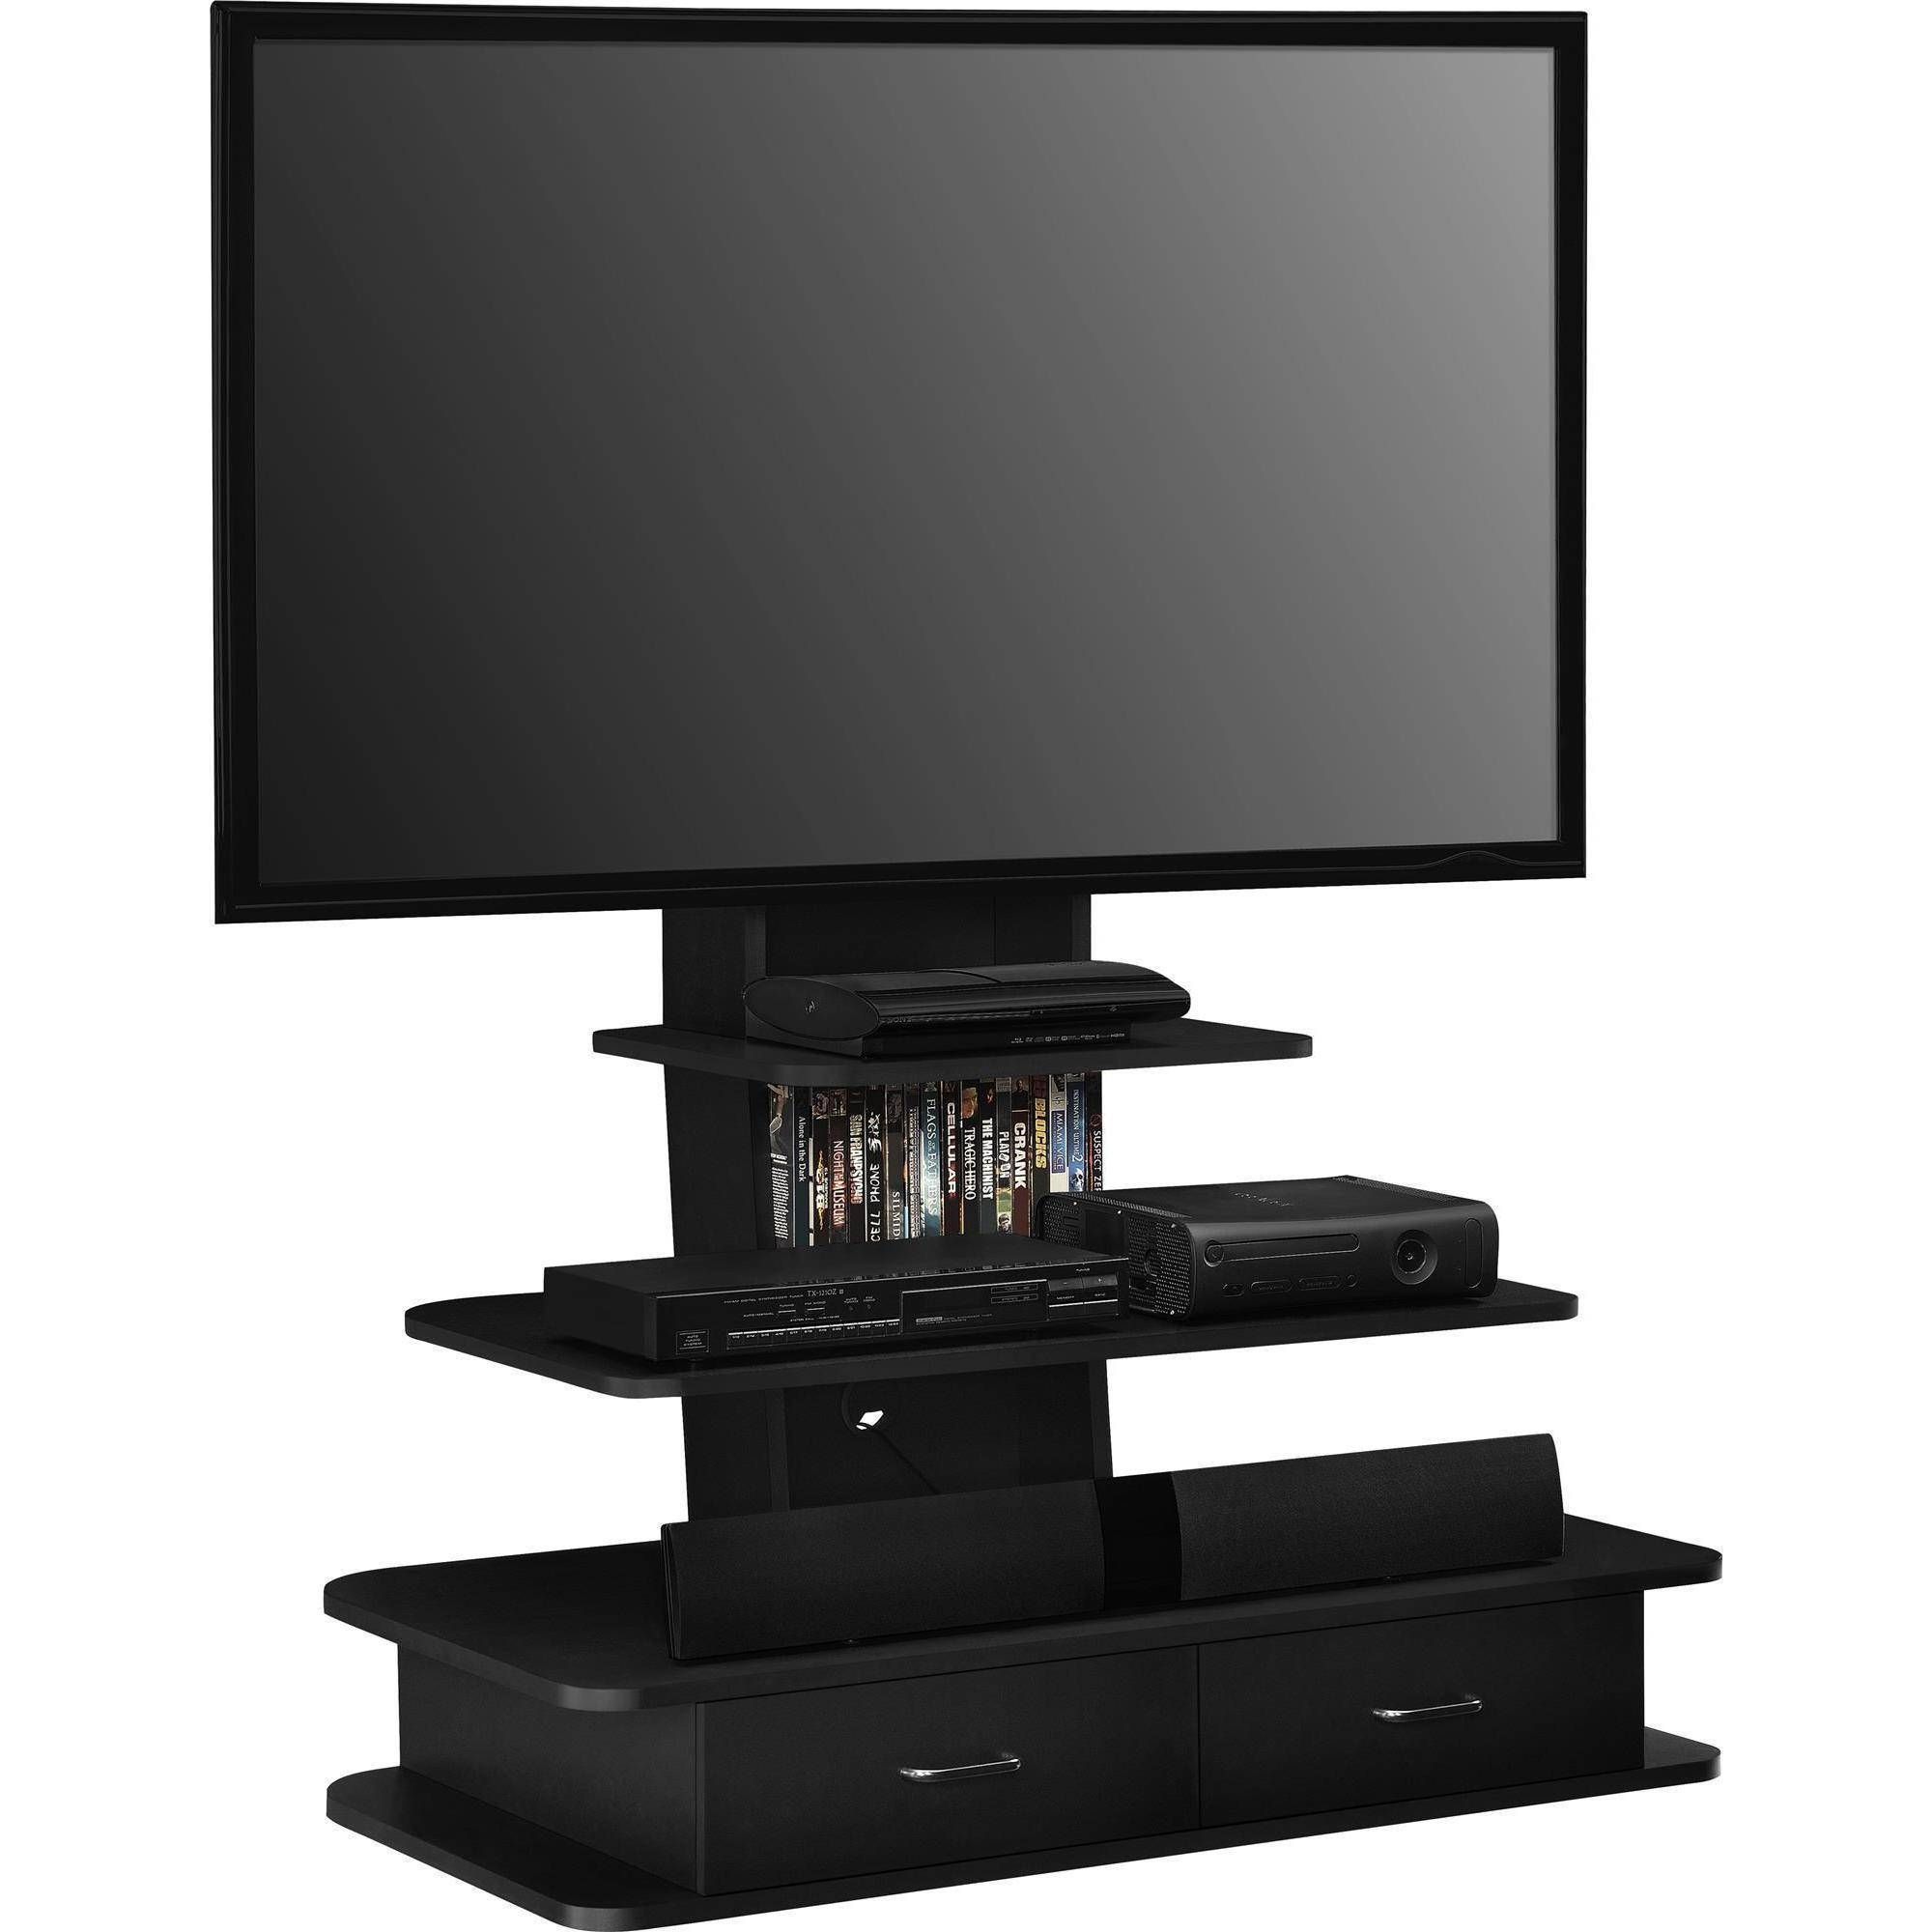 Large Entertainment Center Corner 65 Inch Tall 70 Tv Stand With Shilo Tv Stands For Tvs Up To 65" (View 9 of 15)